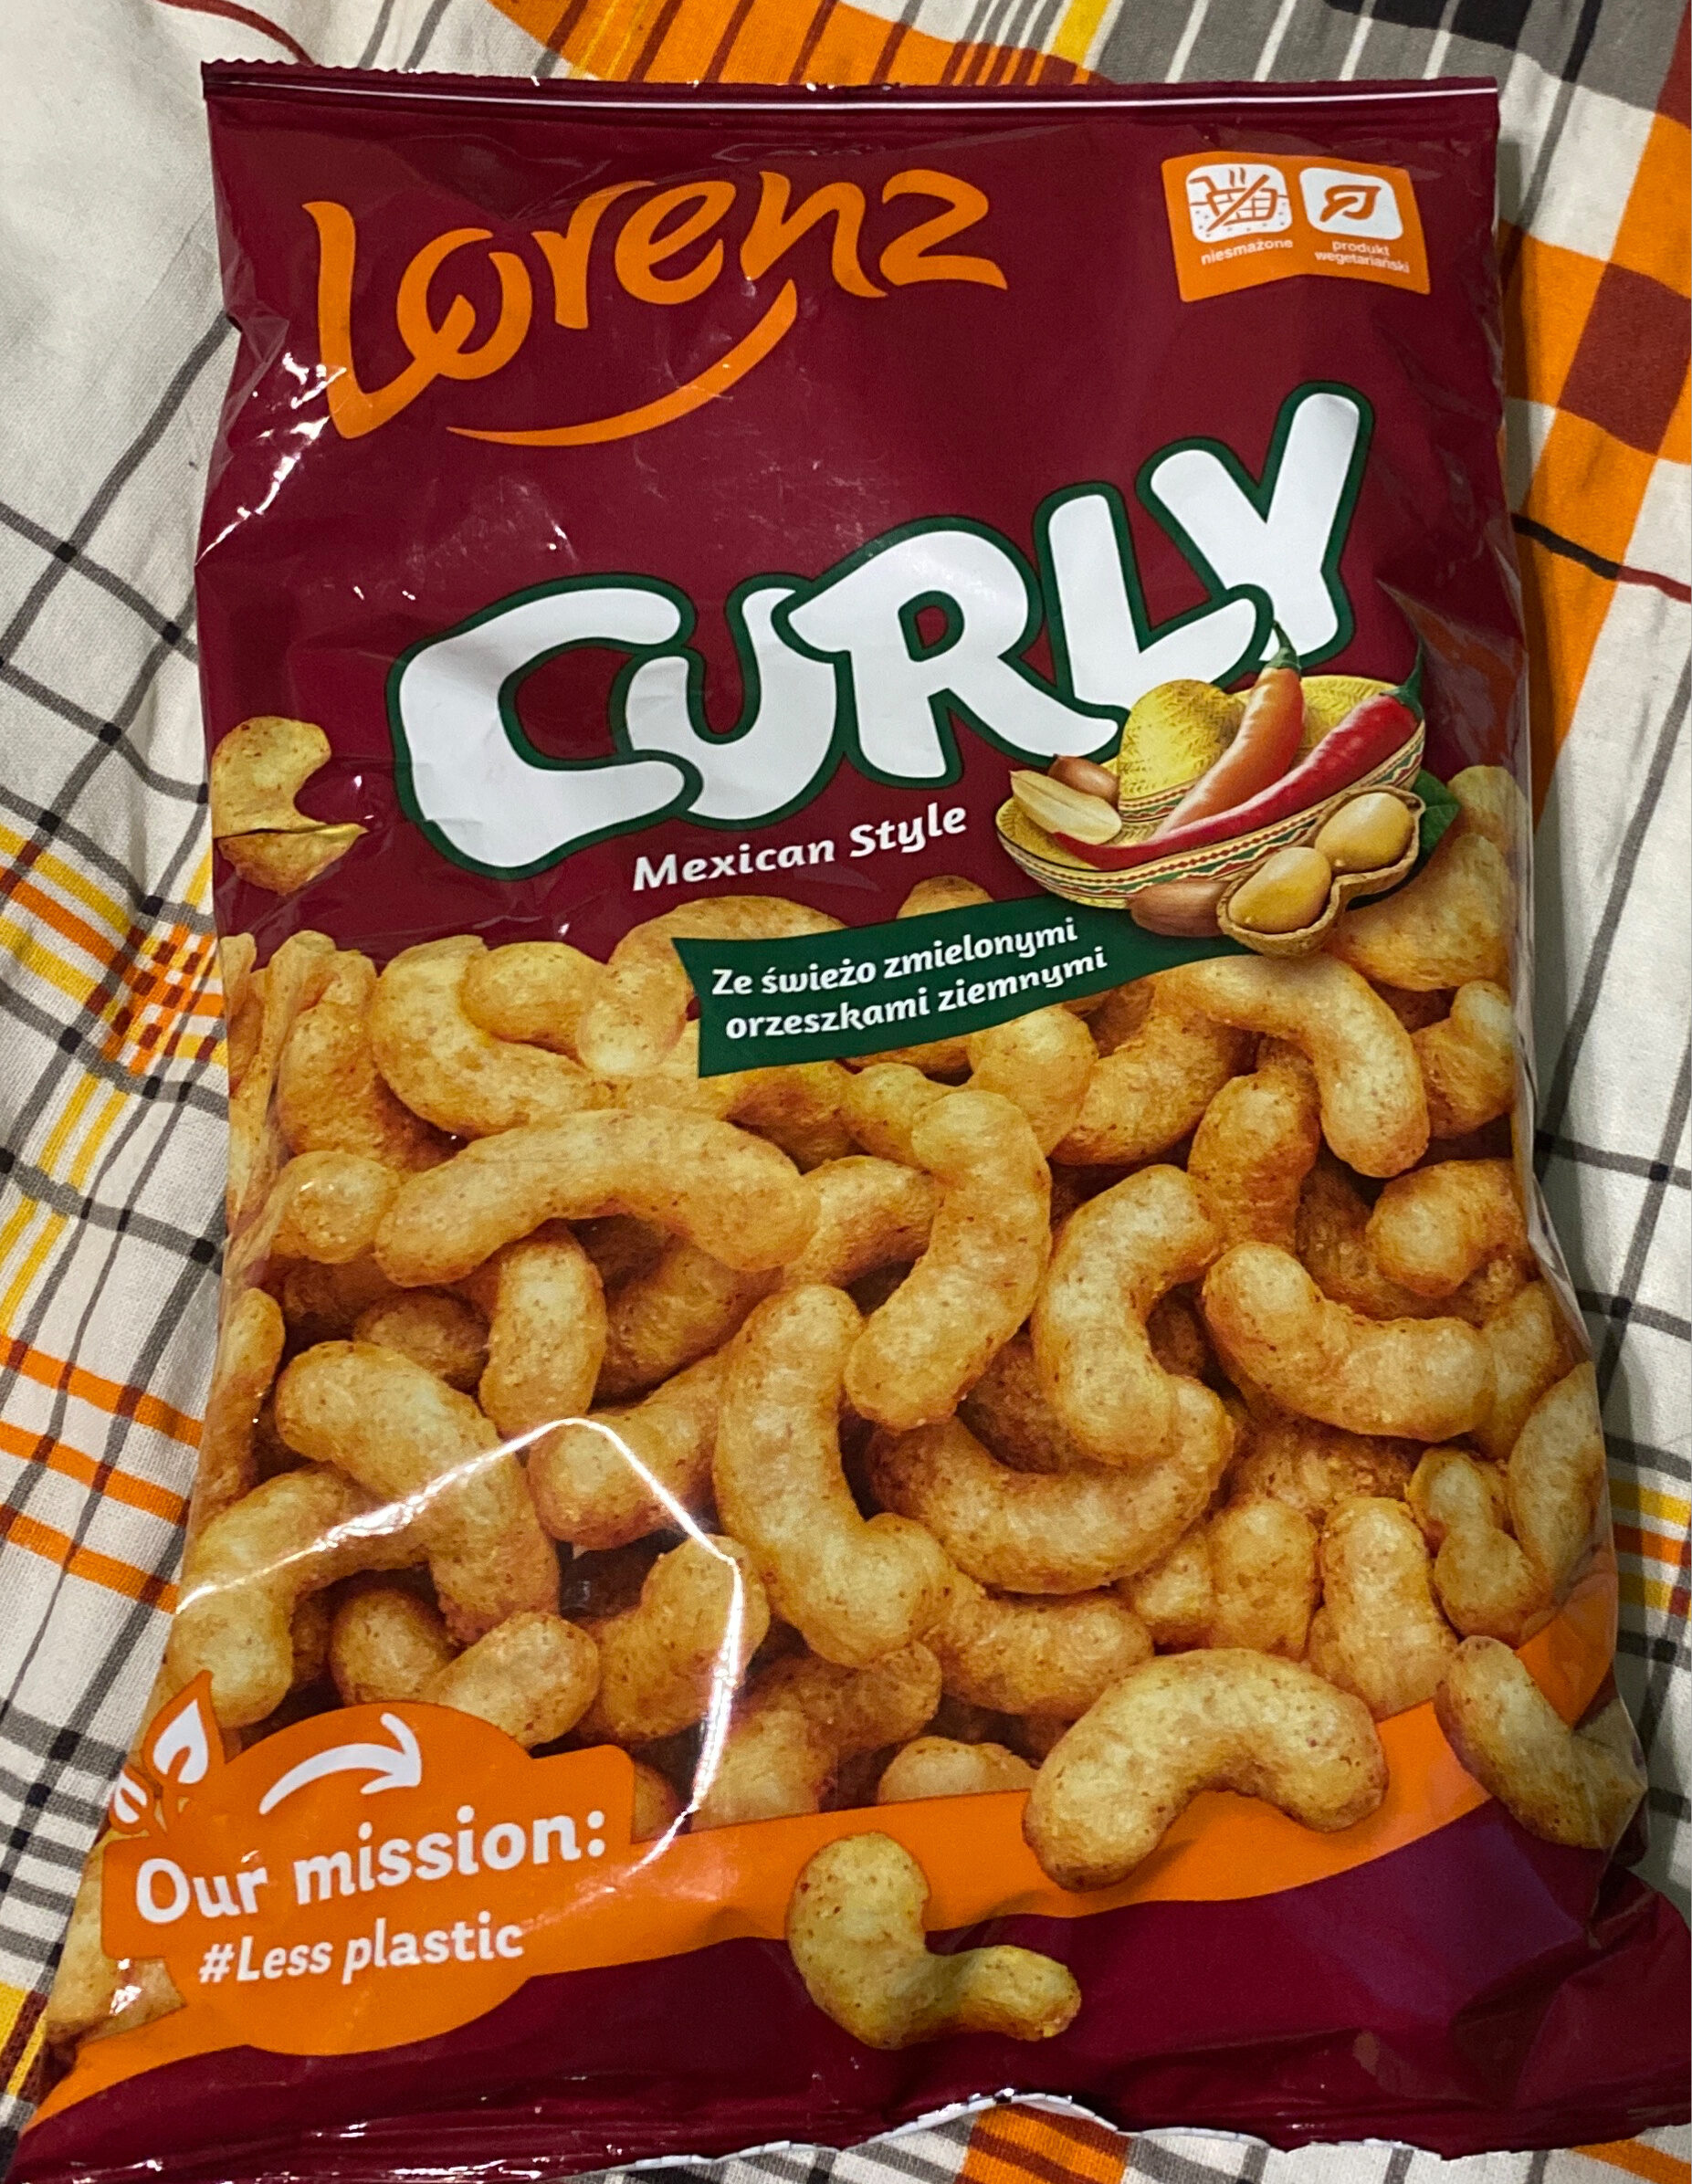 Curly Mexican style - Produkt